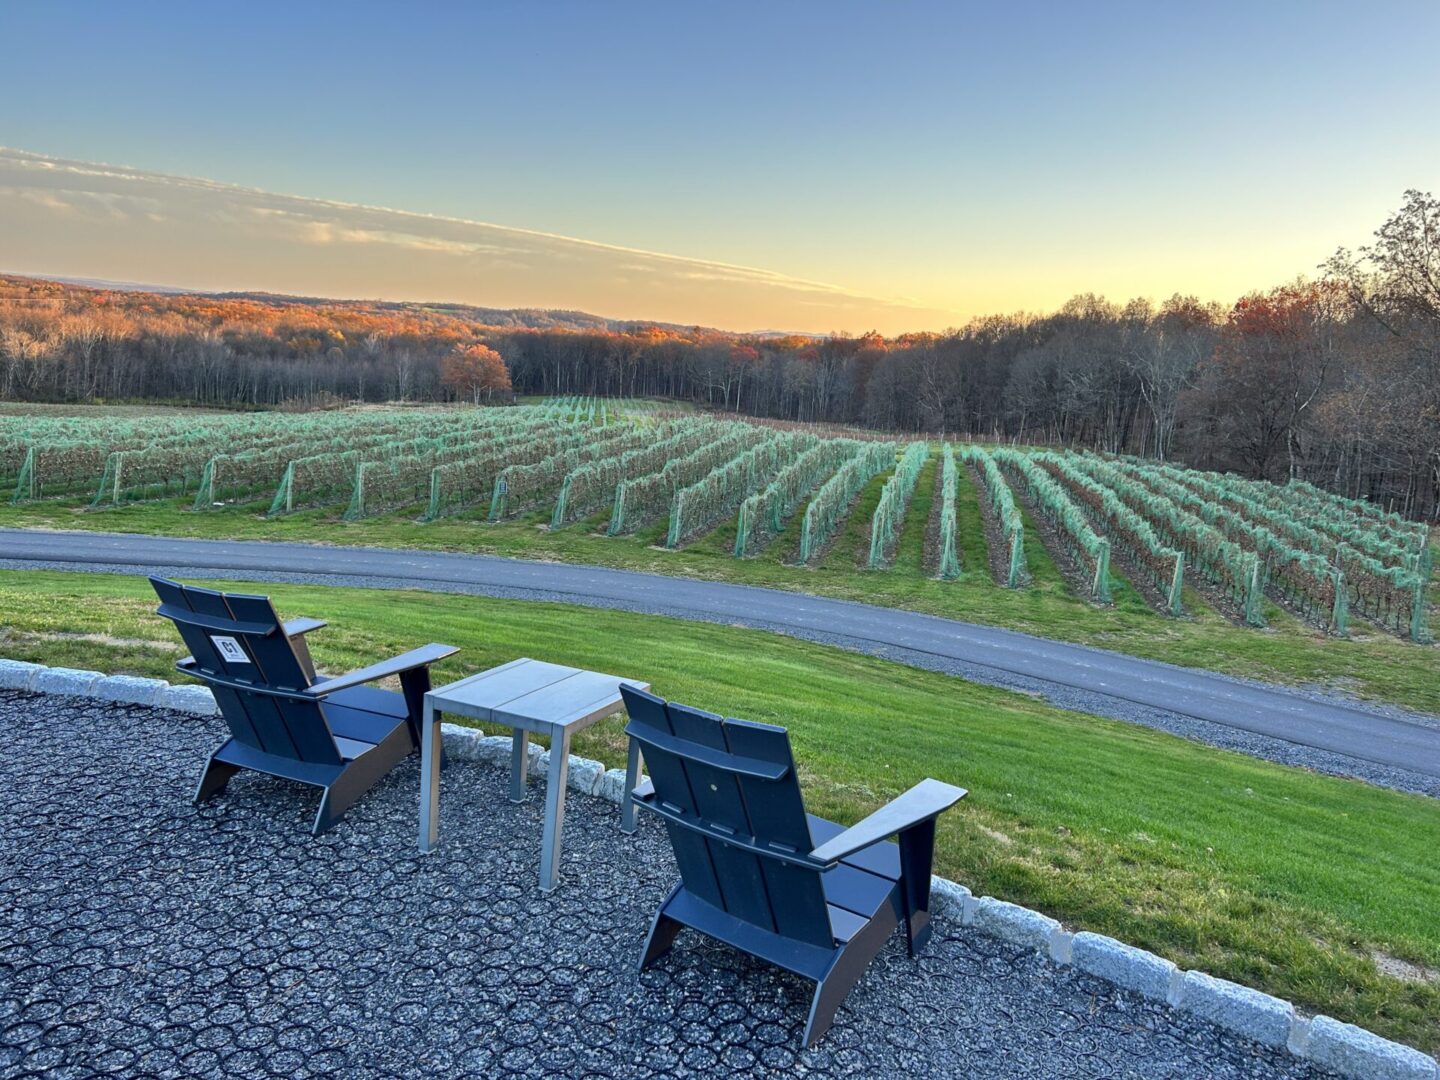 Two lawn chairs and a table on the patio of an outdoor vineyard.